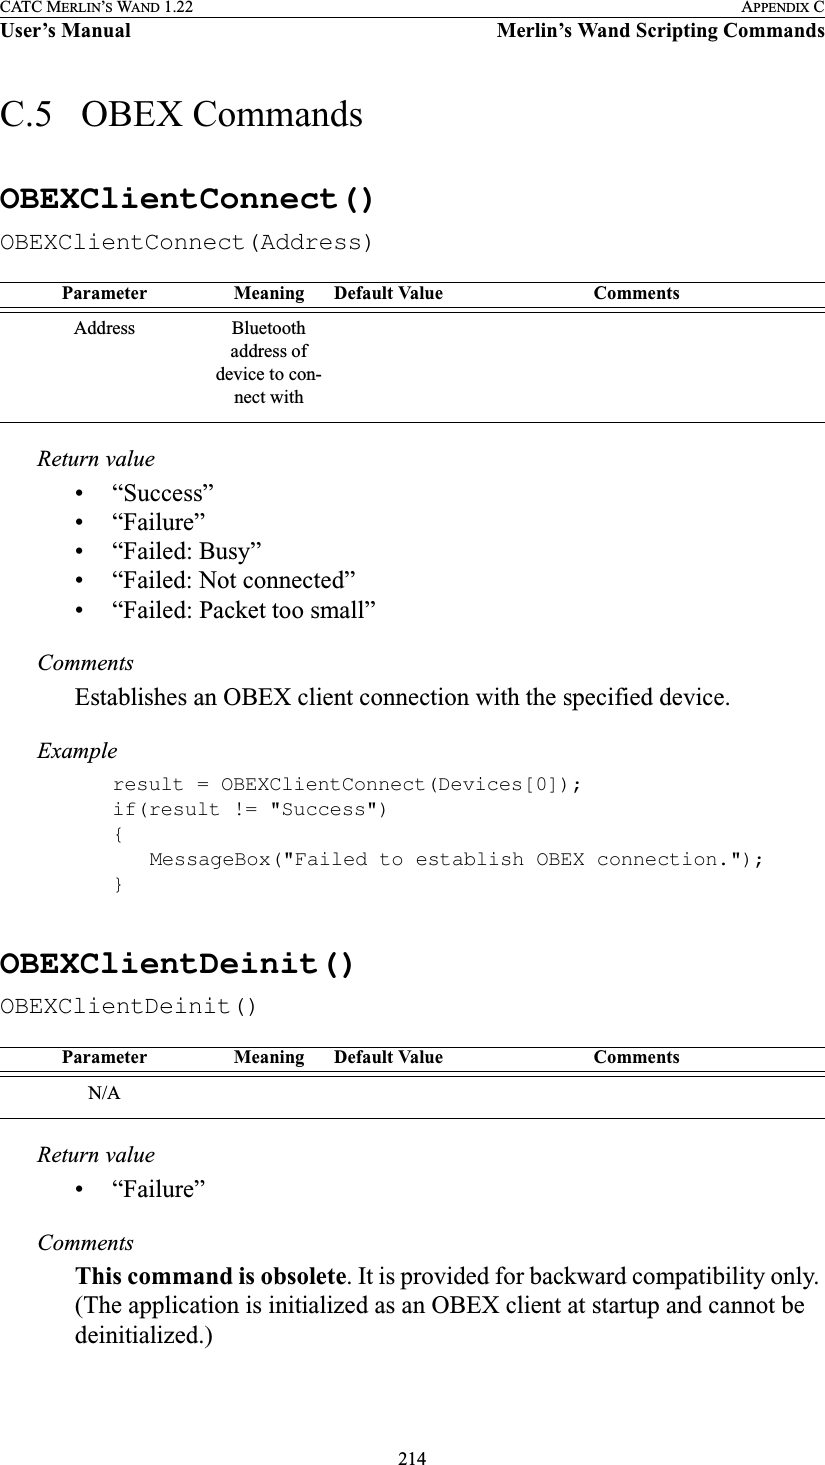 214CATC MERLIN’S WAND 1.22 APPENDIX CUser’s Manual Merlin’s Wand Scripting CommandsC.5   OBEX CommandsOBEXClientConnect()OBEXClientConnect(Address)Return value• “Success”• “Failure”• “Failed: Busy”• “Failed: Not connected”• “Failed: Packet too small”CommentsEstablishes an OBEX client connection with the specified device.Exampleresult = OBEXClientConnect(Devices[0]);if(result != &quot;Success&quot;){MessageBox(&quot;Failed to establish OBEX connection.&quot;);}OBEXClientDeinit()OBEXClientDeinit()Return value• “Failure”CommentsThis command is obsolete. It is provided for backward compatibility only. (The application is initialized as an OBEX client at startup and cannot be deinitialized.)Parameter Meaning Default Value CommentsAddress Bluetooth address of device to con-nect withParameter Meaning Default Value CommentsN/A